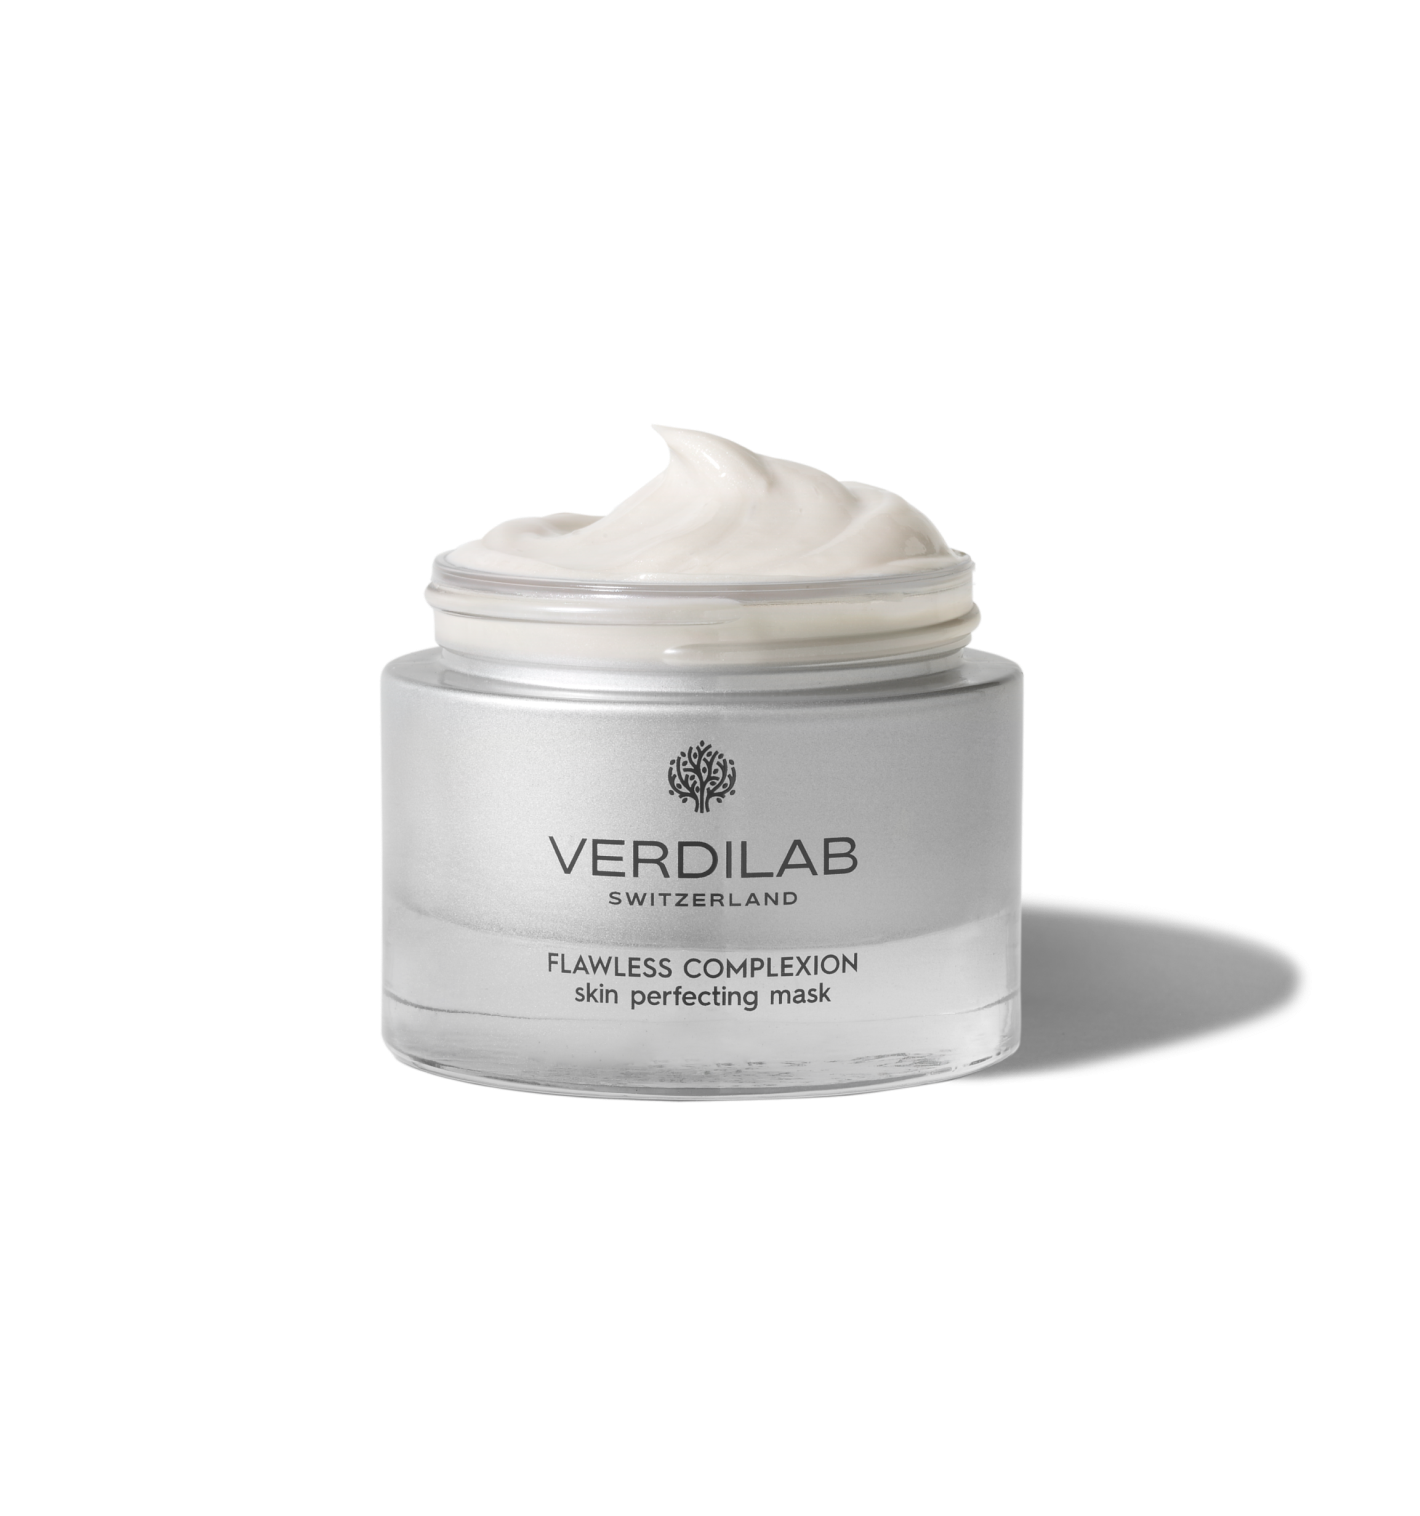 Verdilabs Flawless Complexion Skin Perfecting Mask